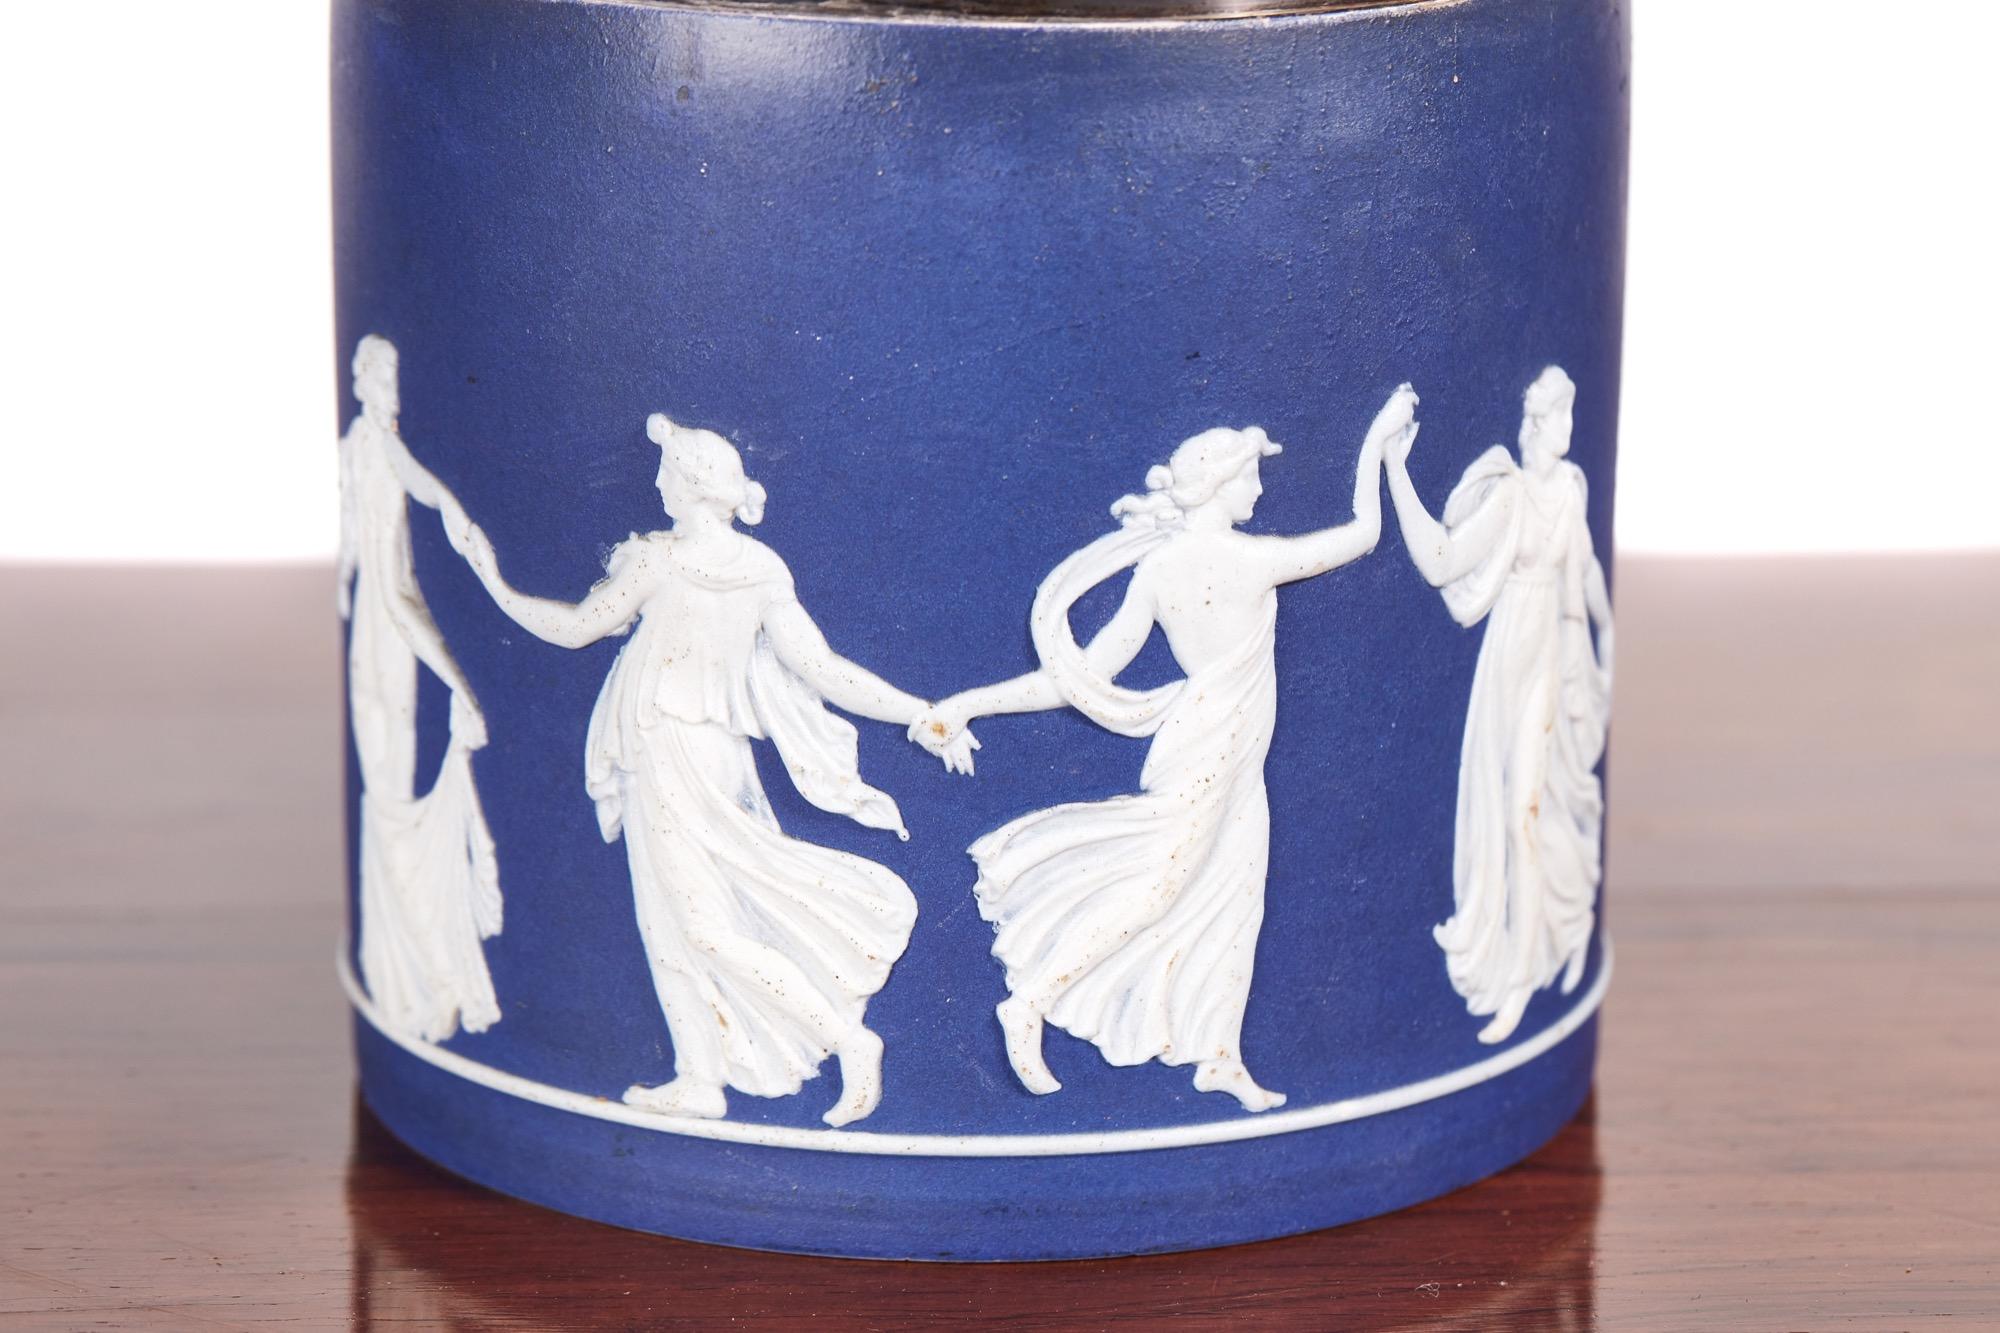 Antique wedgwood jasperware biscuit barrel, the body decorated with classical scenes in a white cameo on a blue back ground, swing silver plated handle , the base marked wedgwood
Lovely condition
Measures: 4